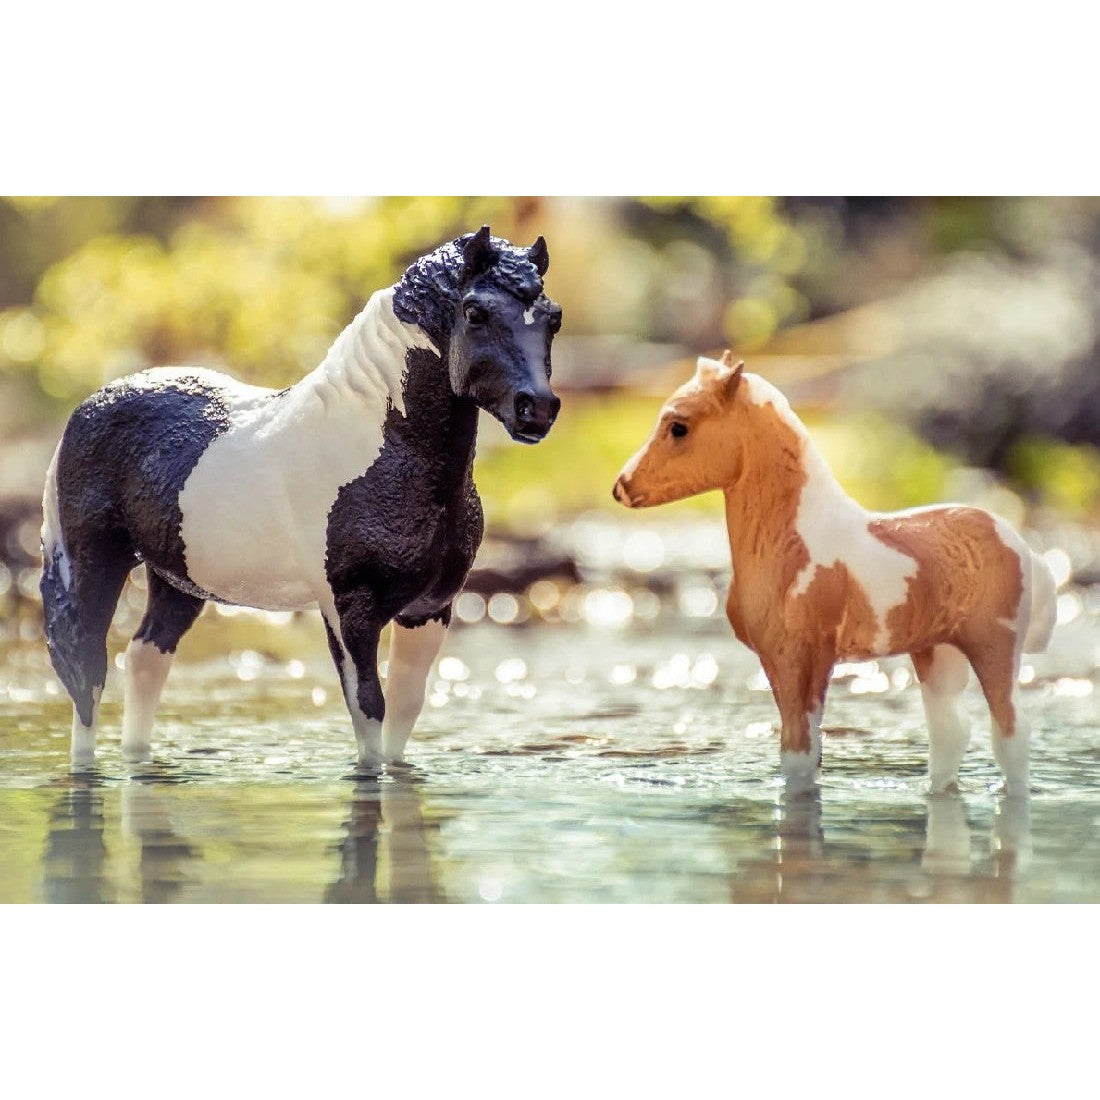 Two Breyer Horse Toys standing in shallow water, one black and white.